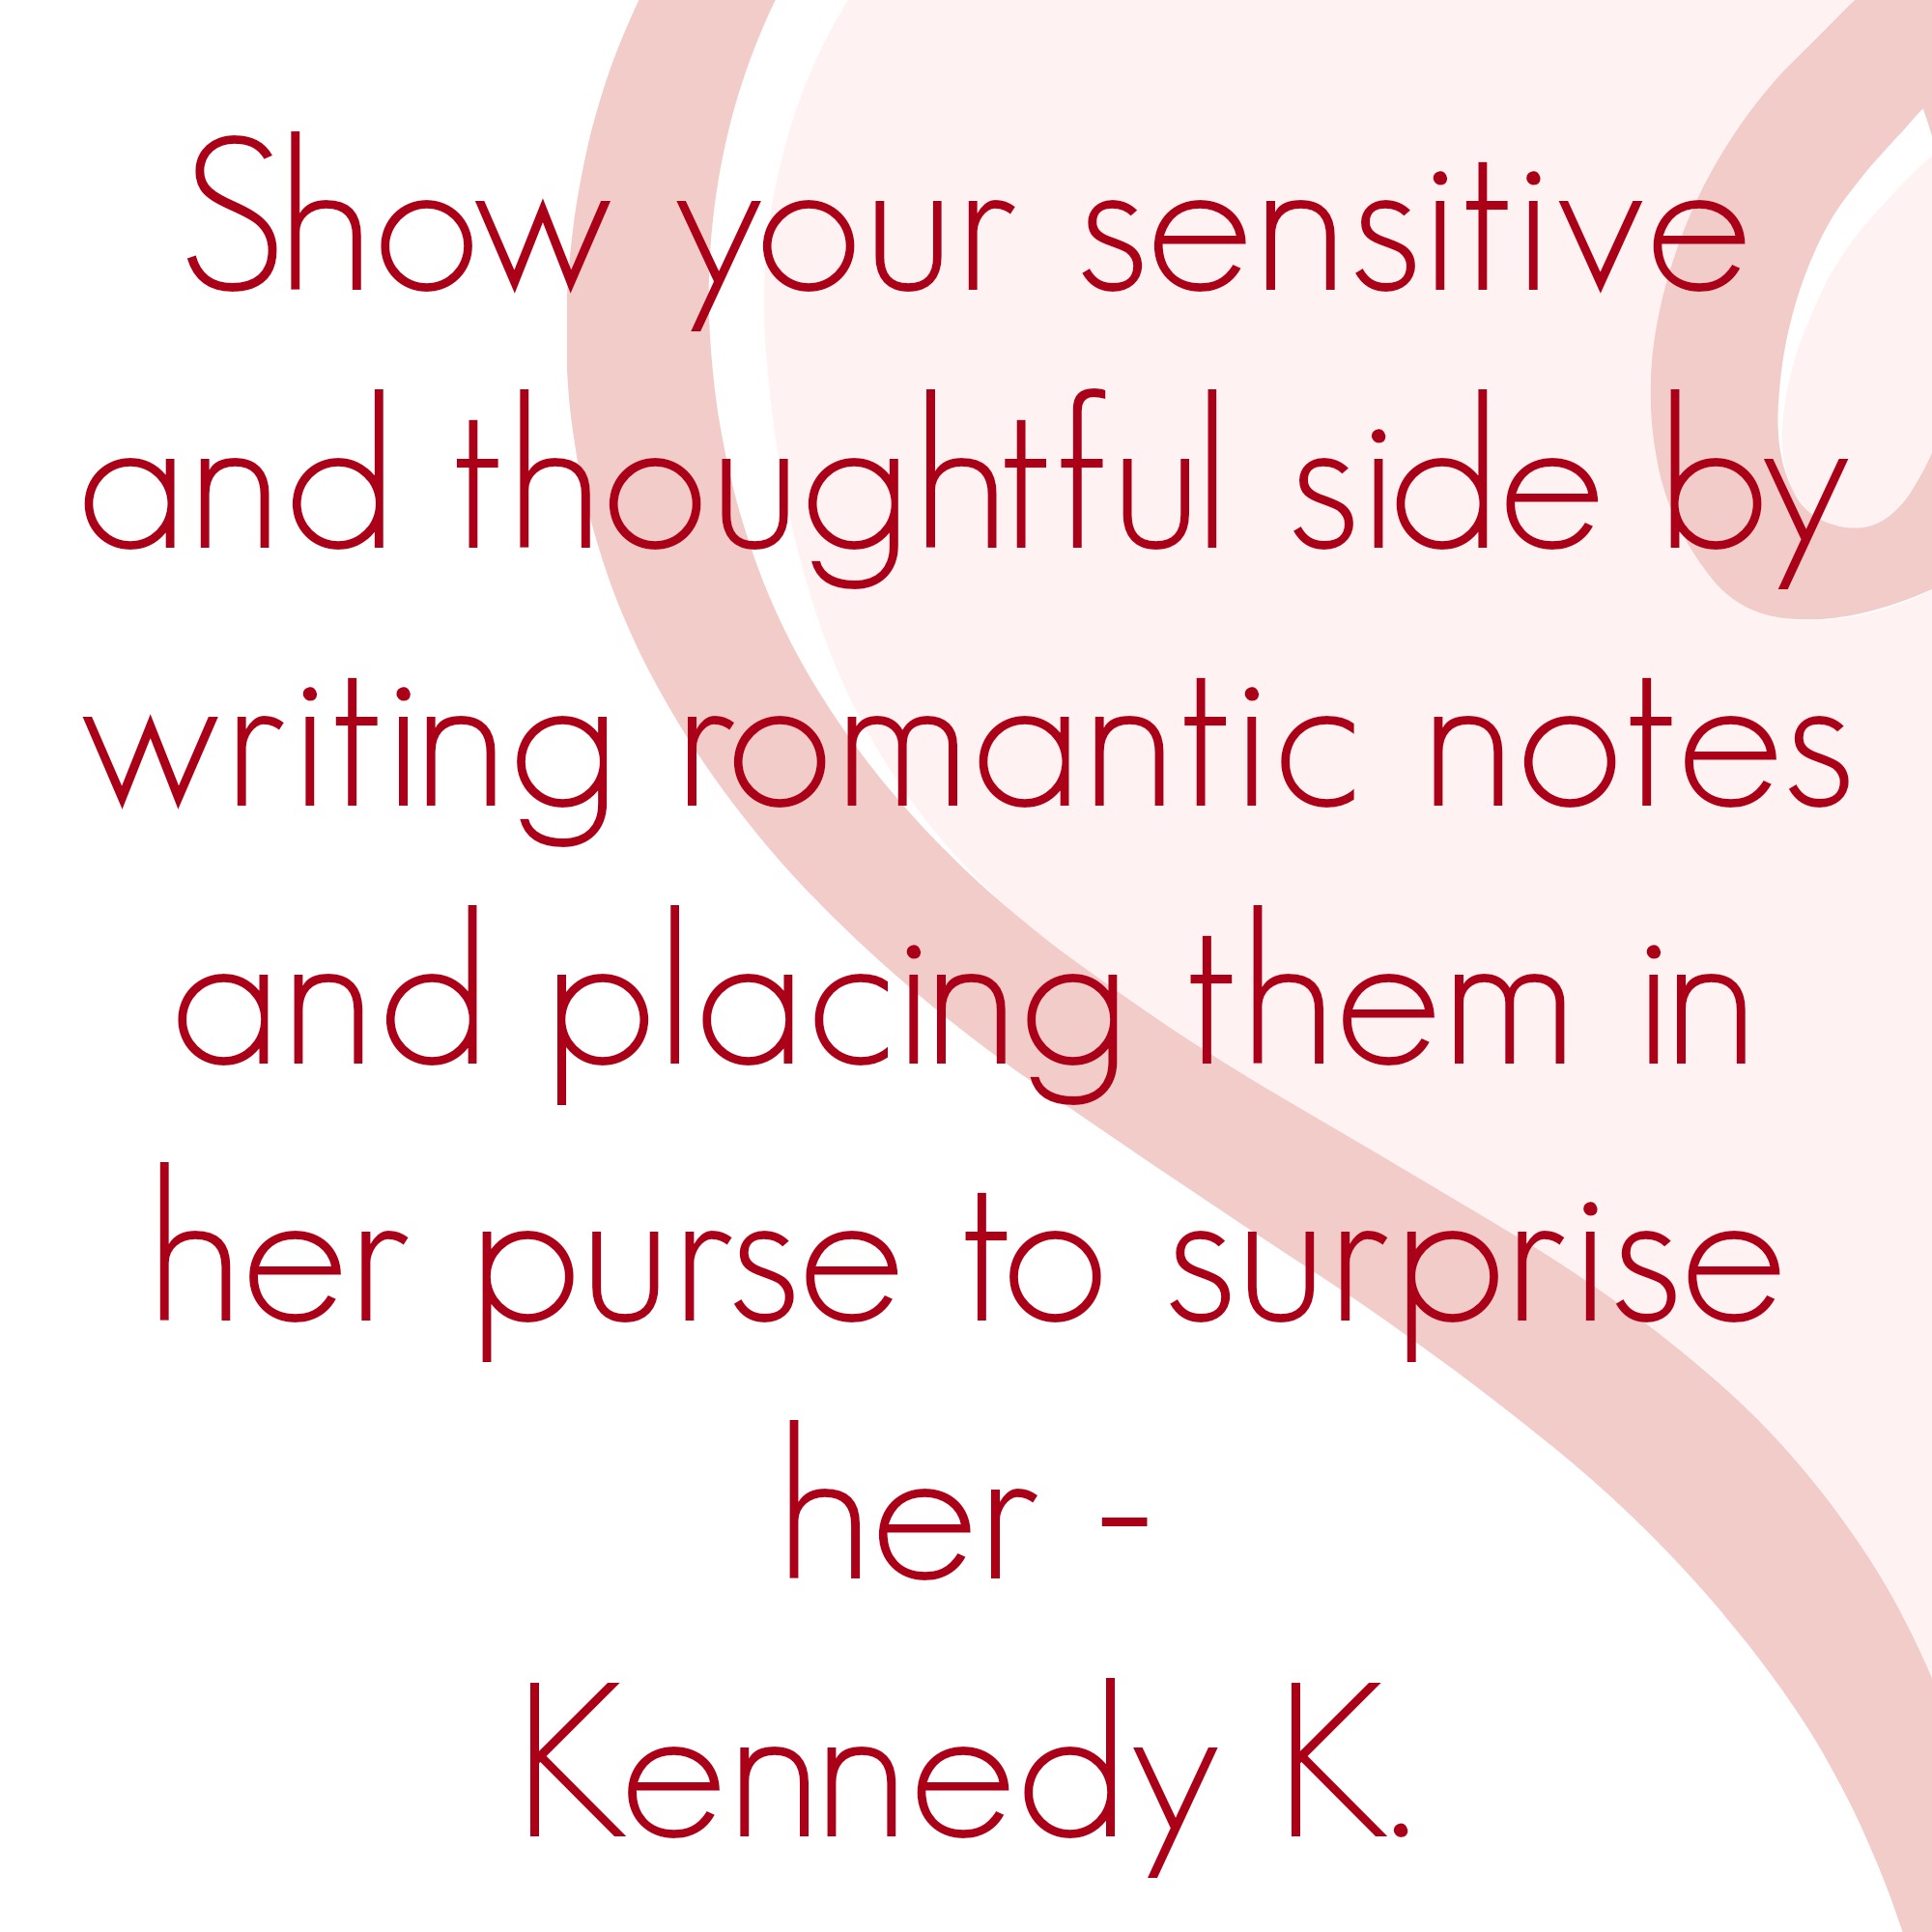 Show your sensitive and thoughtful side by writing romantic notes and placing them in her purse to surprise her.